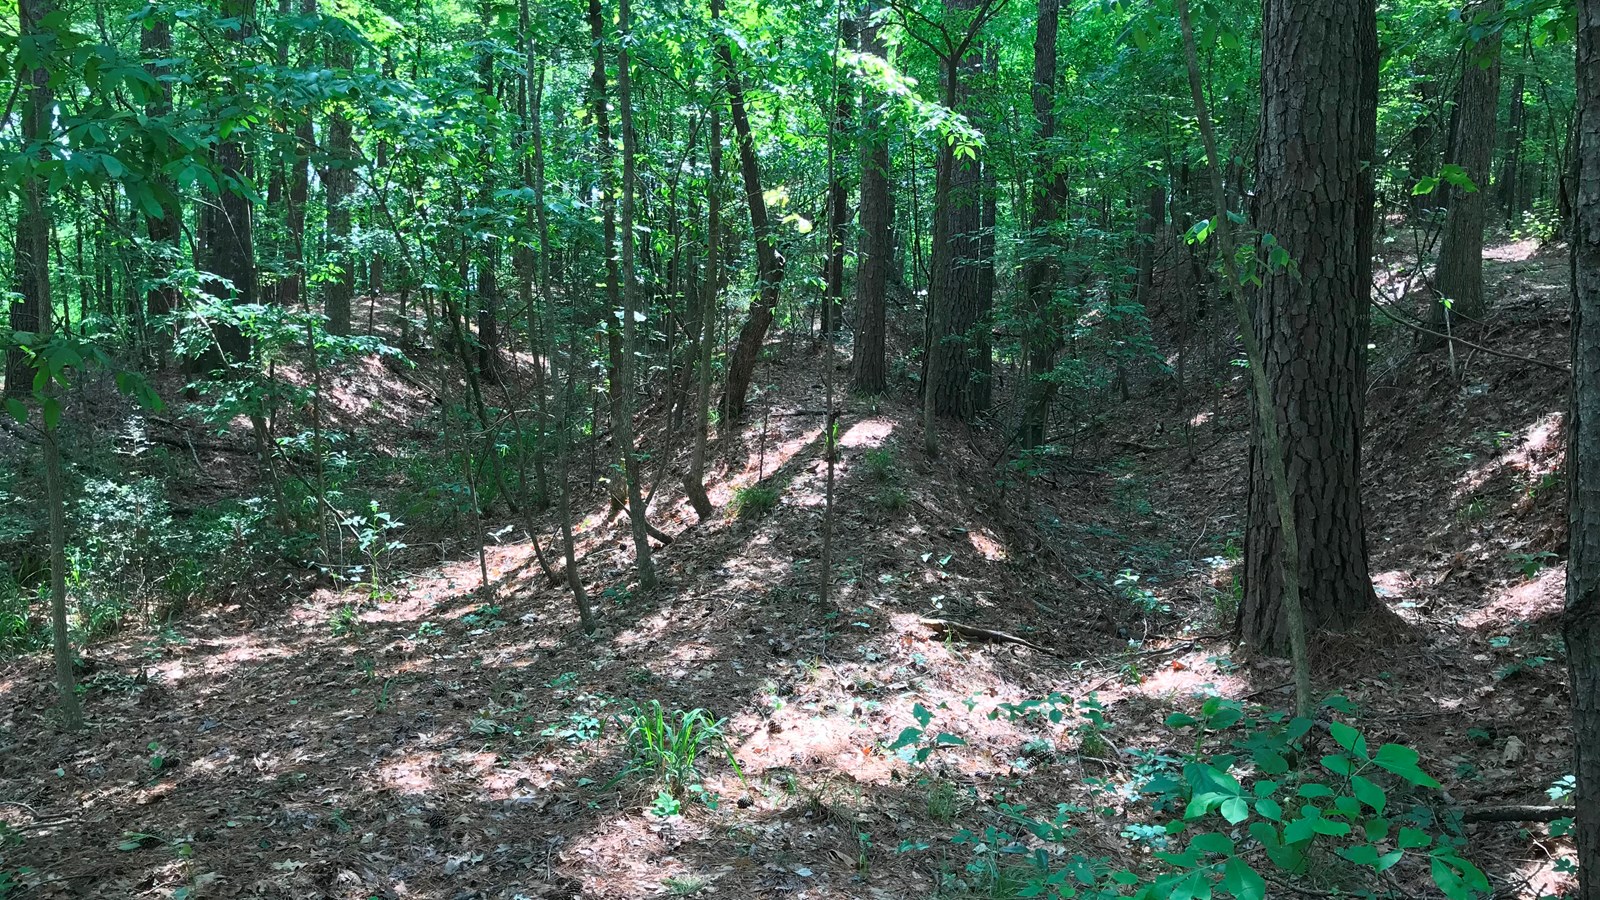 A dense forest of lush green vegetation with an eroded channel in the leaf-covered ground.